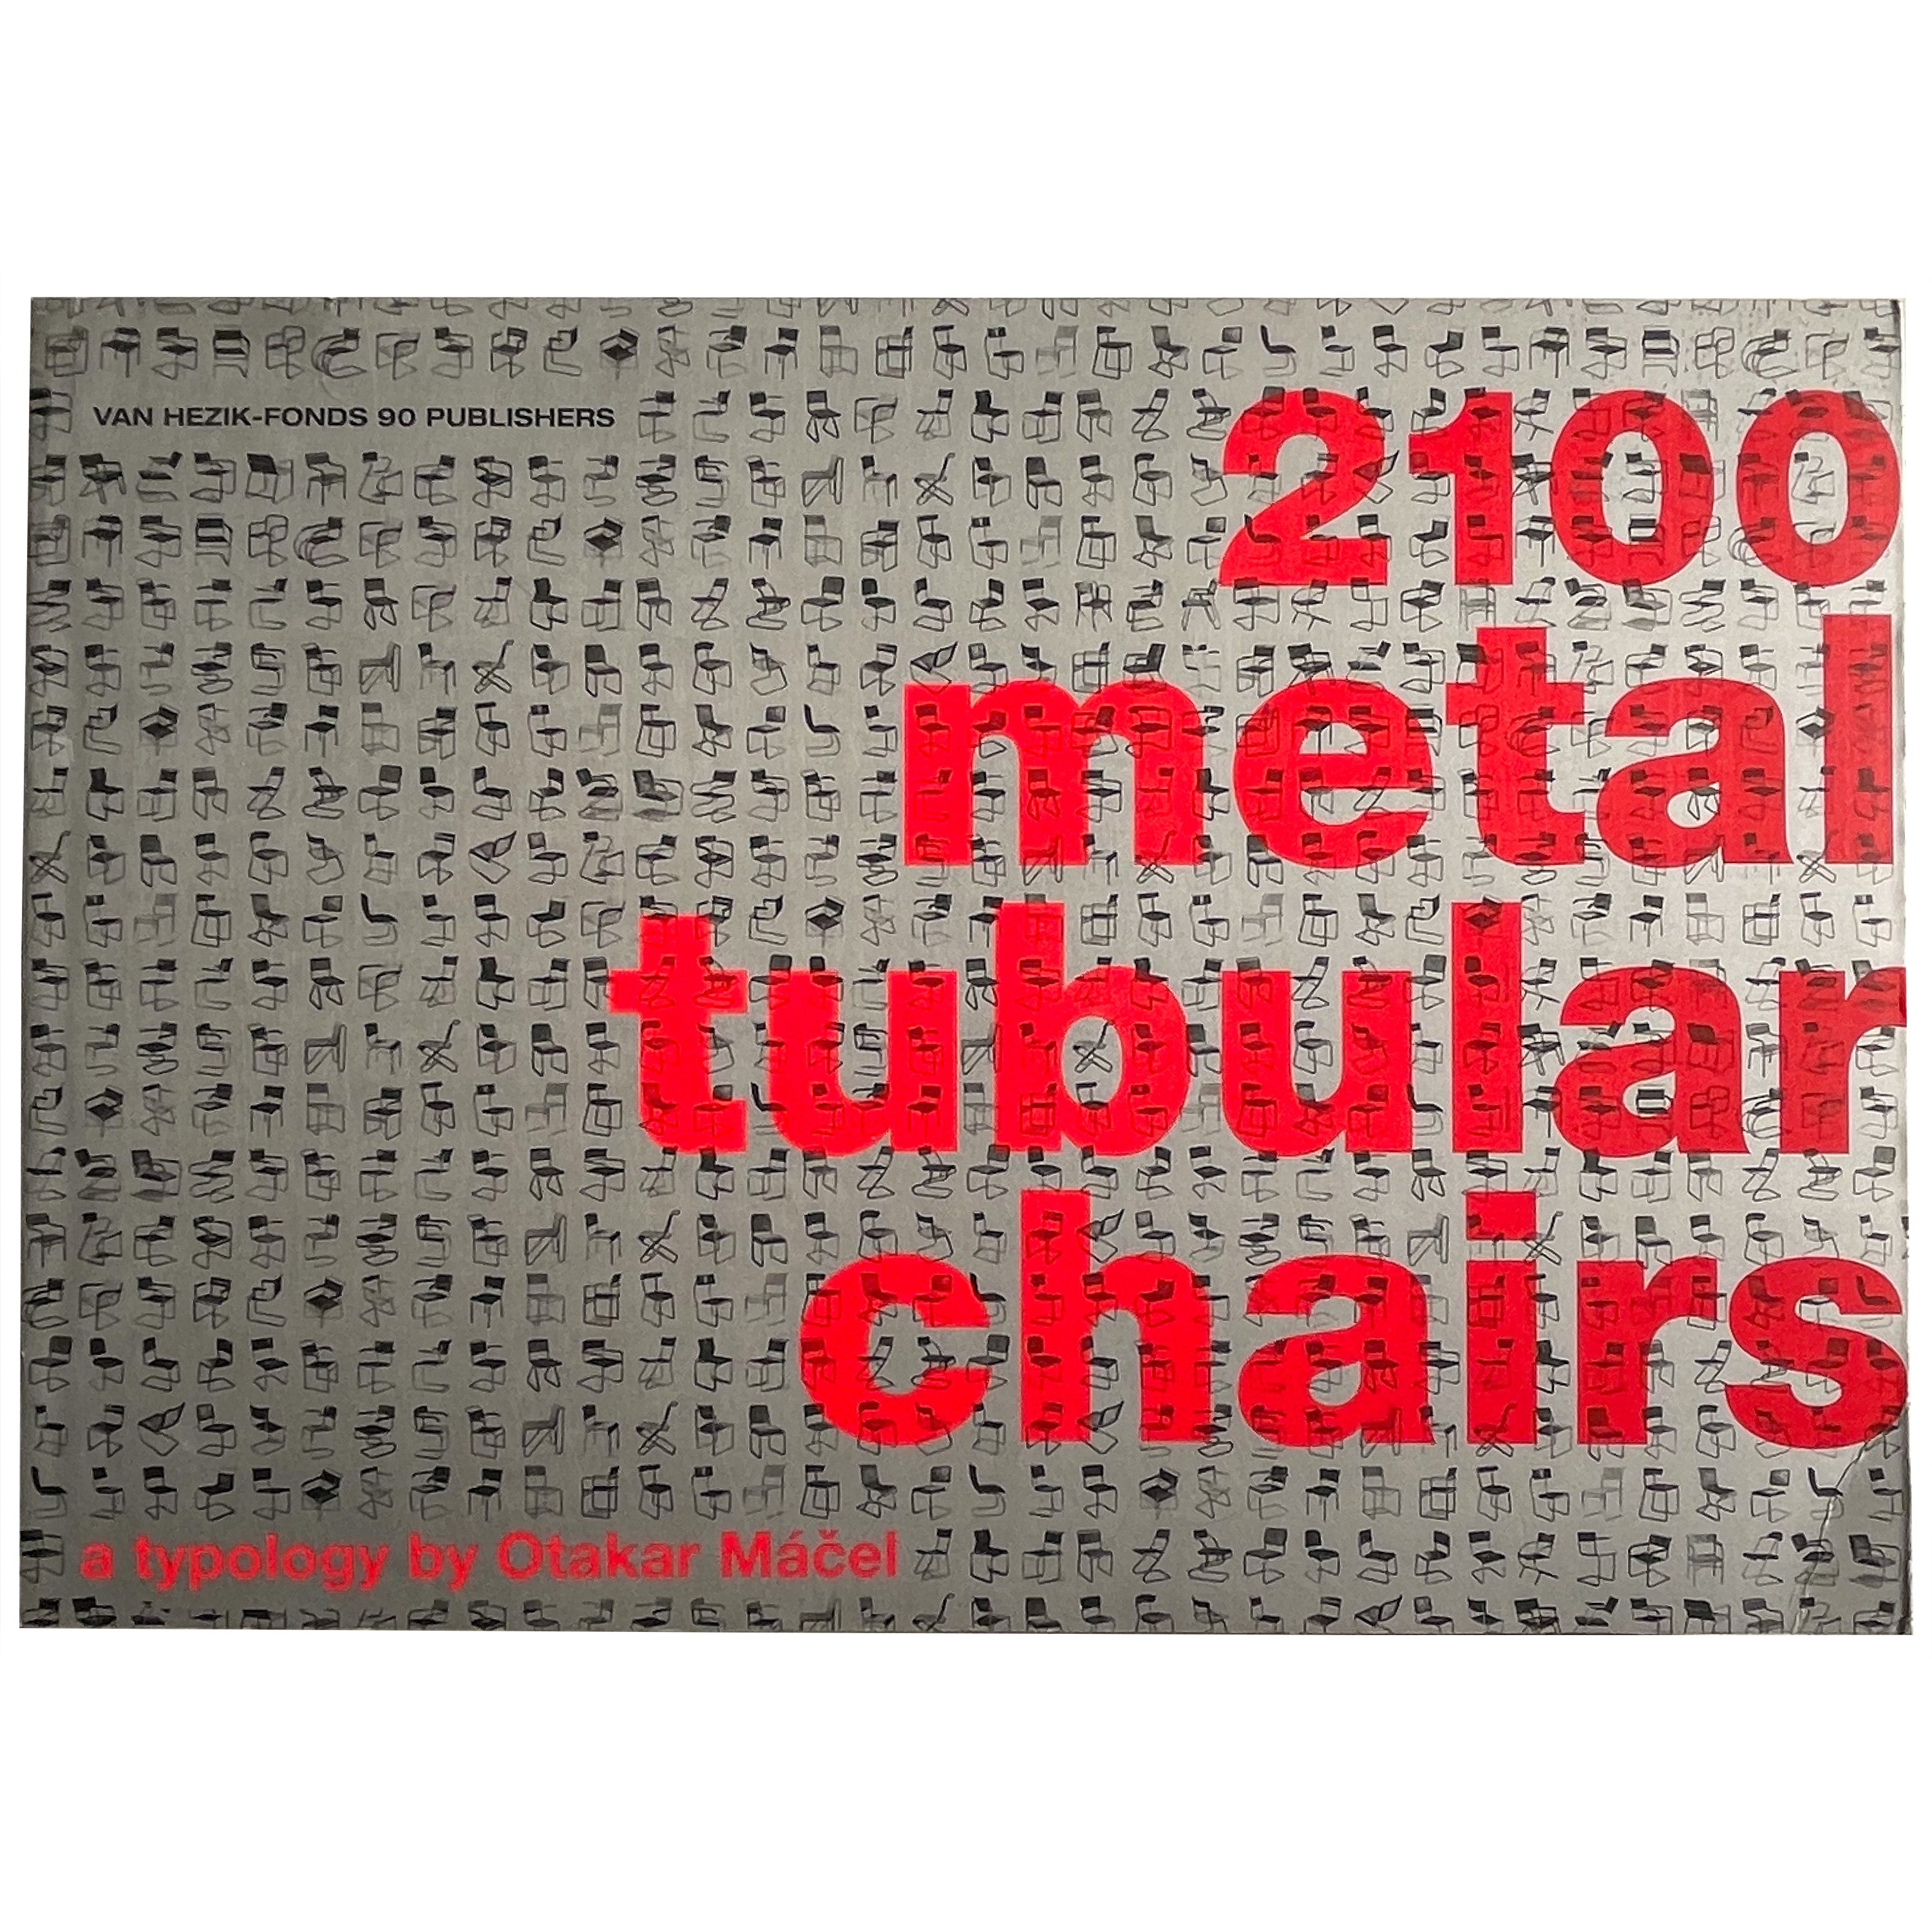 2100 Metal Tubular Chairs: a Typology For Sale